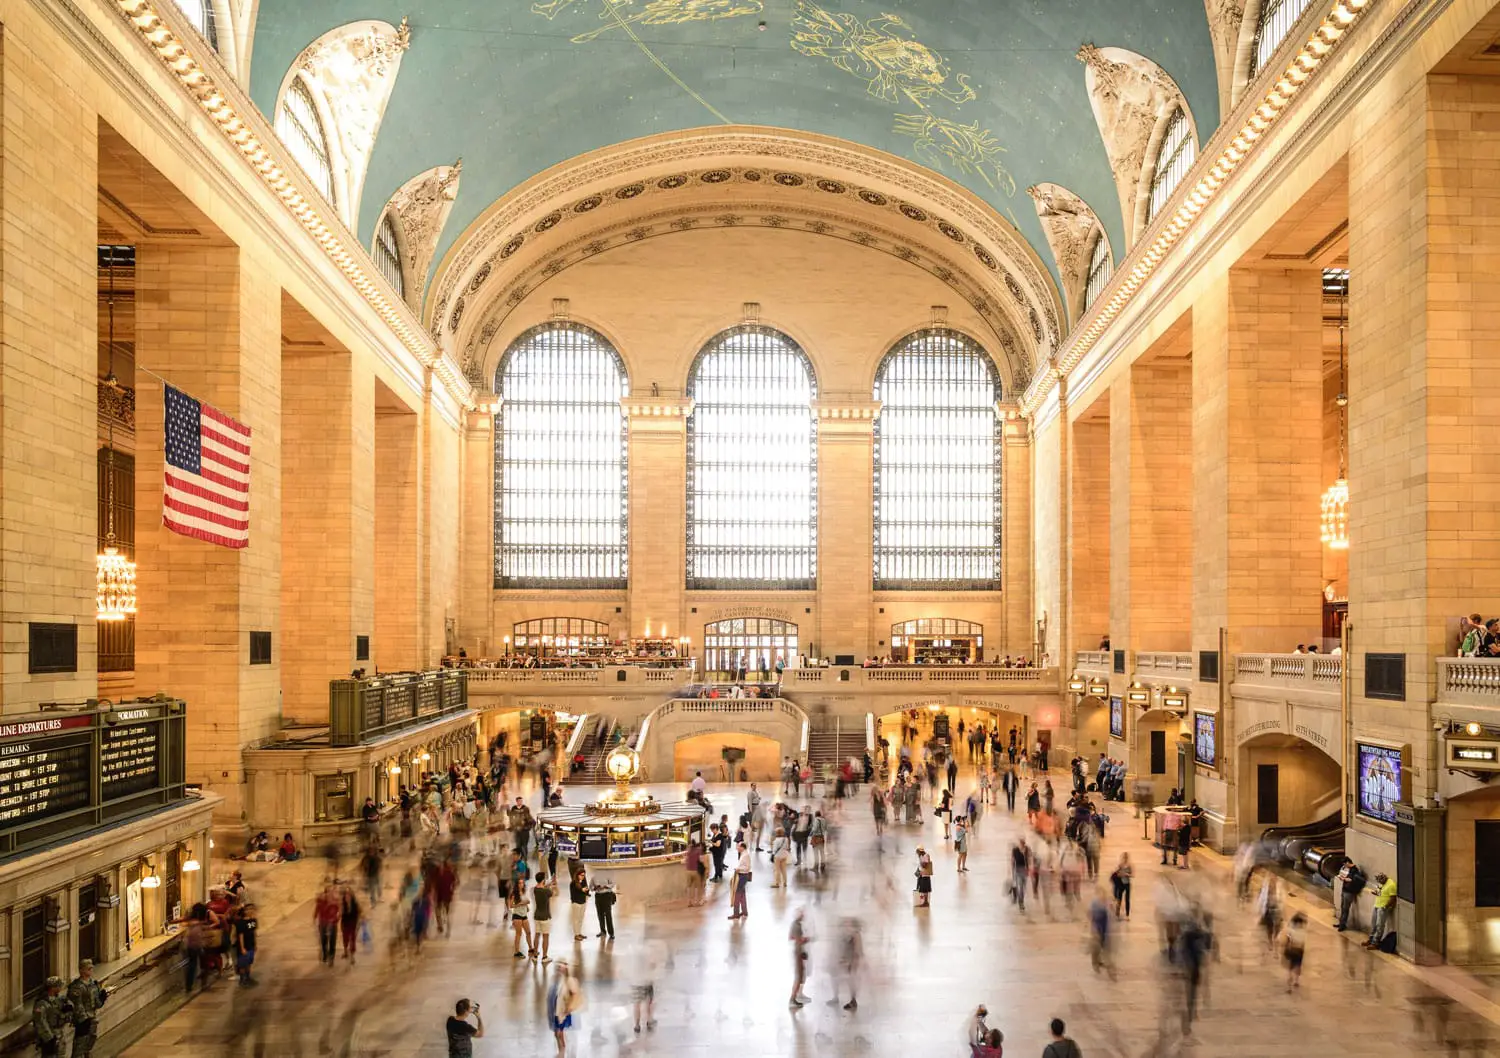 Commuters and tourists in the Grand Central Station in New York.